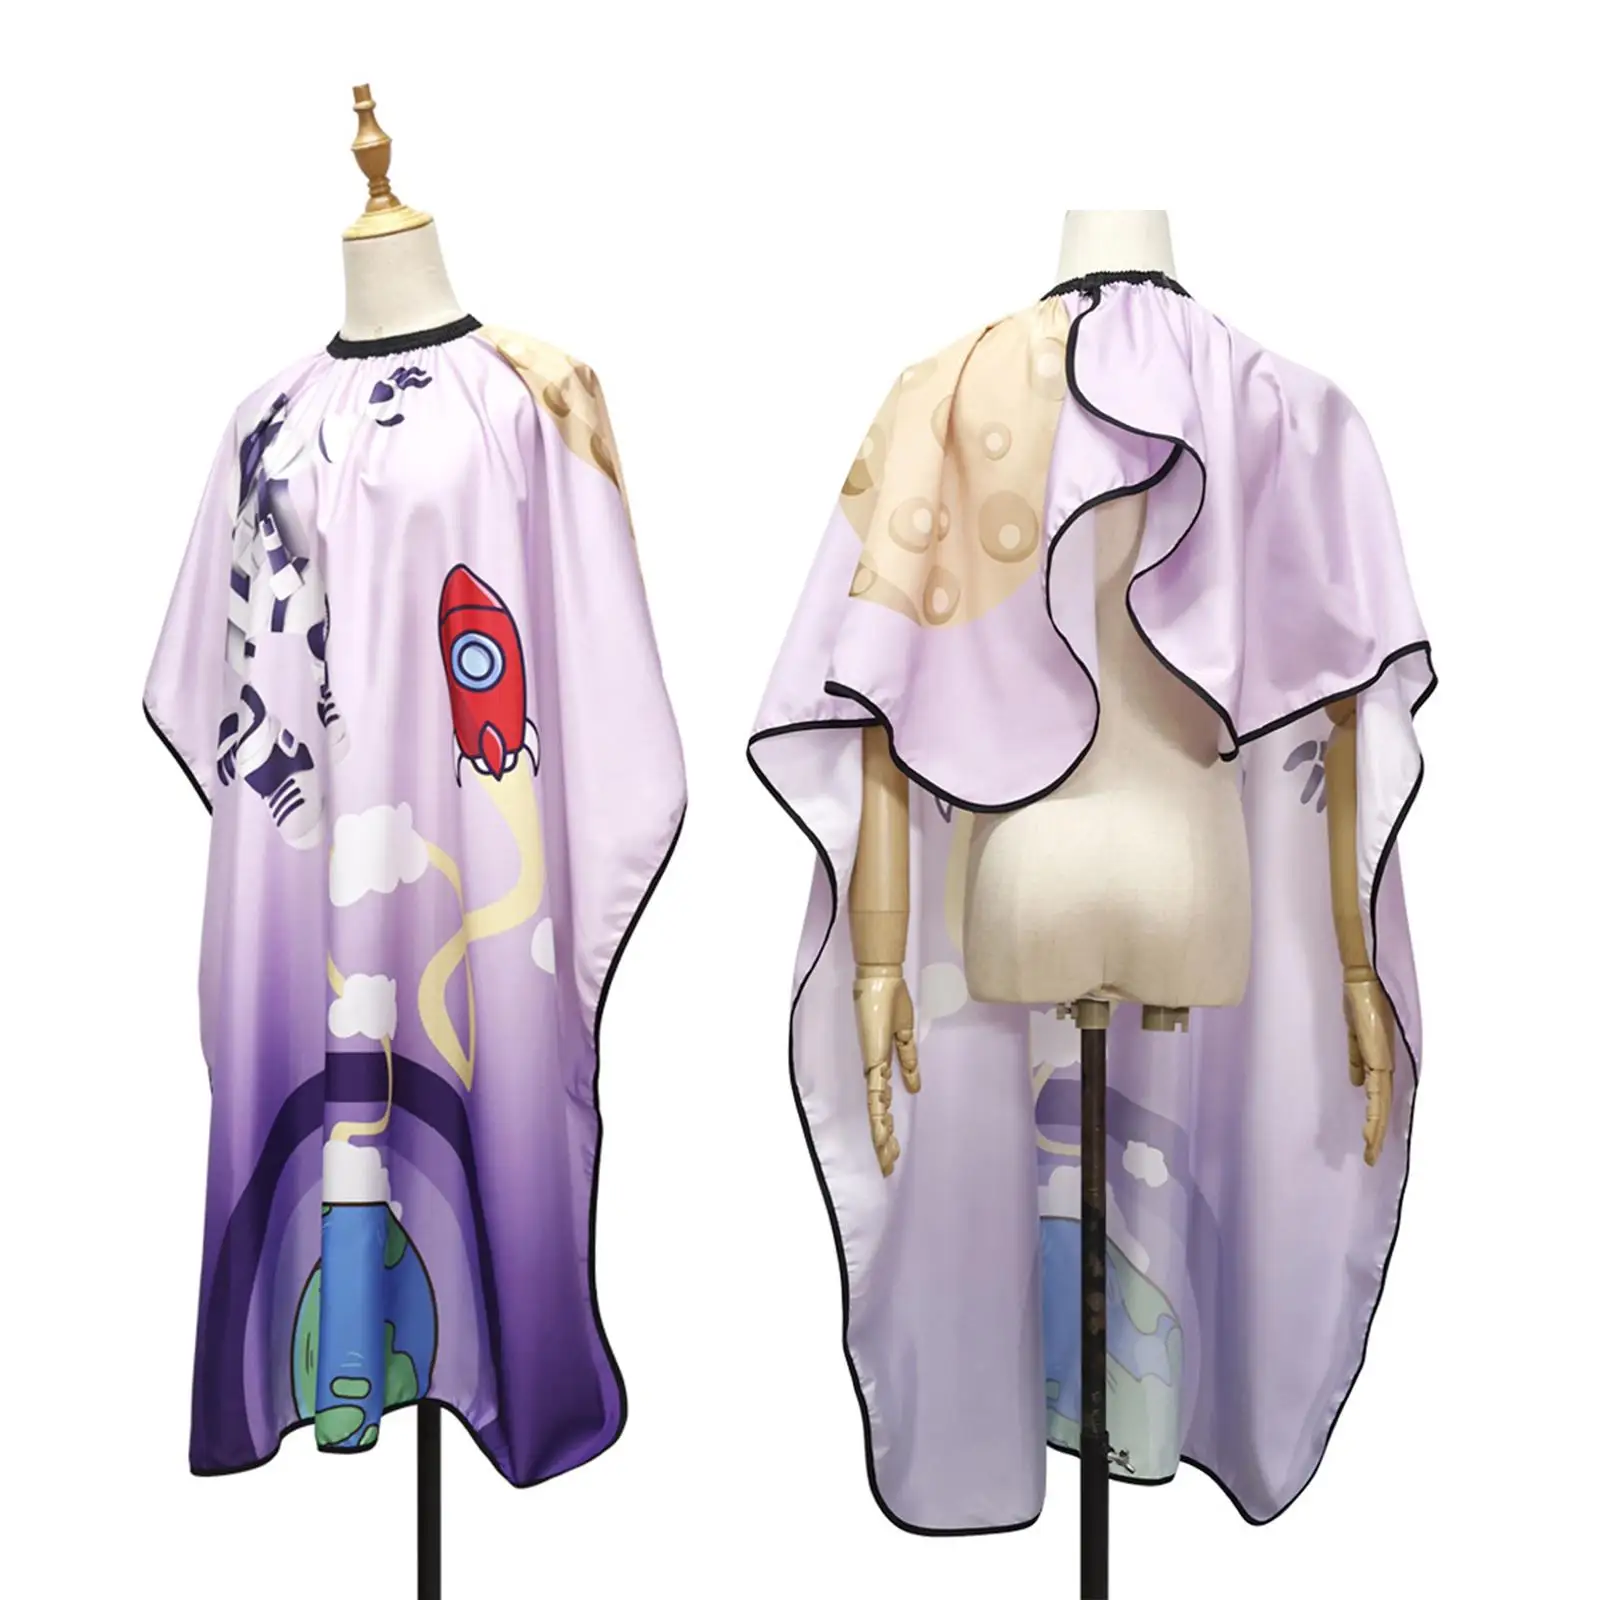 Children Hairdressing Cape Barber Salon and Home Use Hairdressing Apron